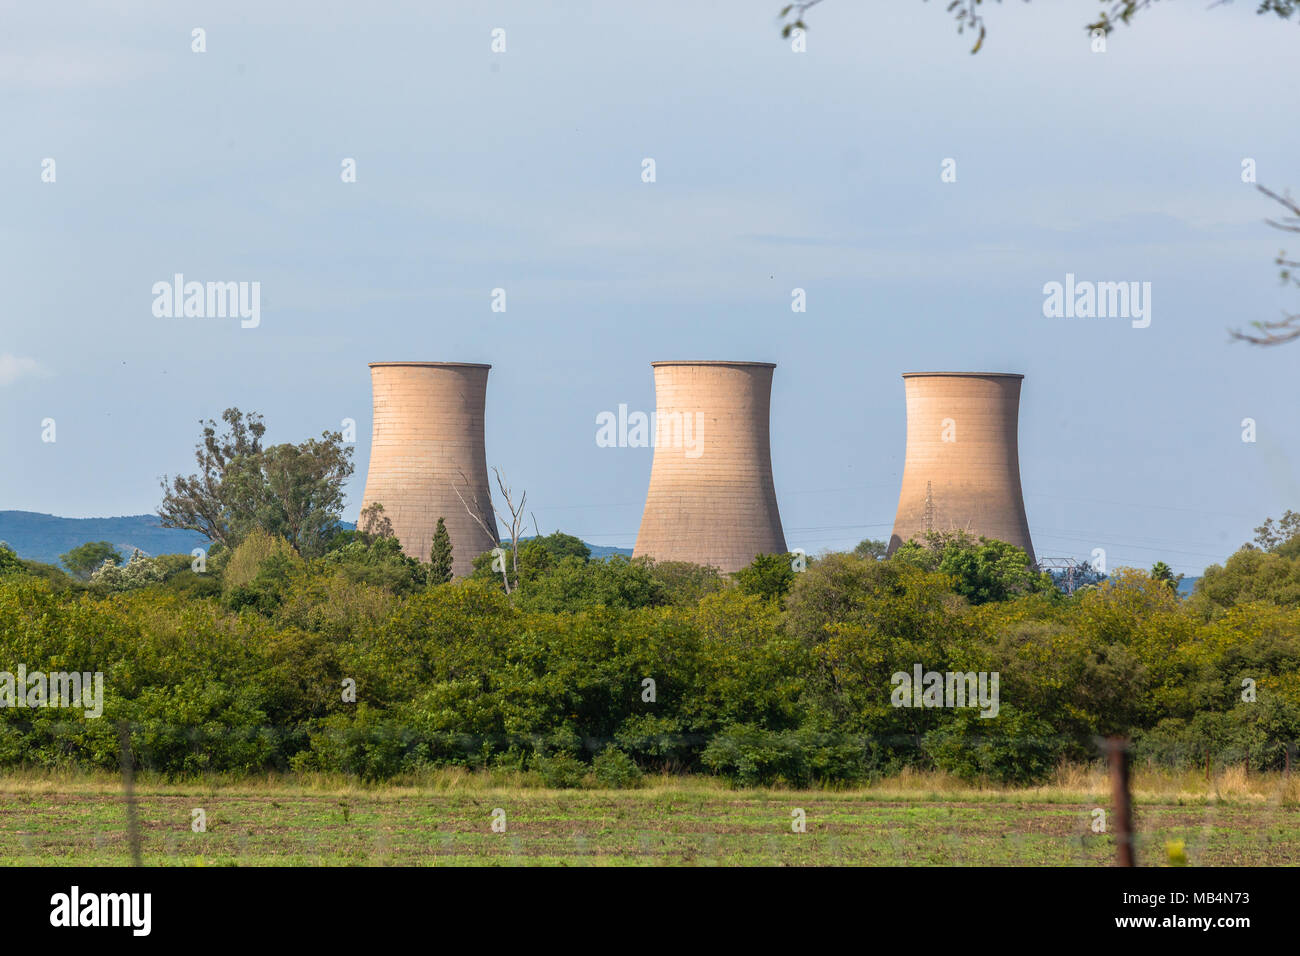 Three power station water cooling towers building structures outside city in countryside. Stock Photo